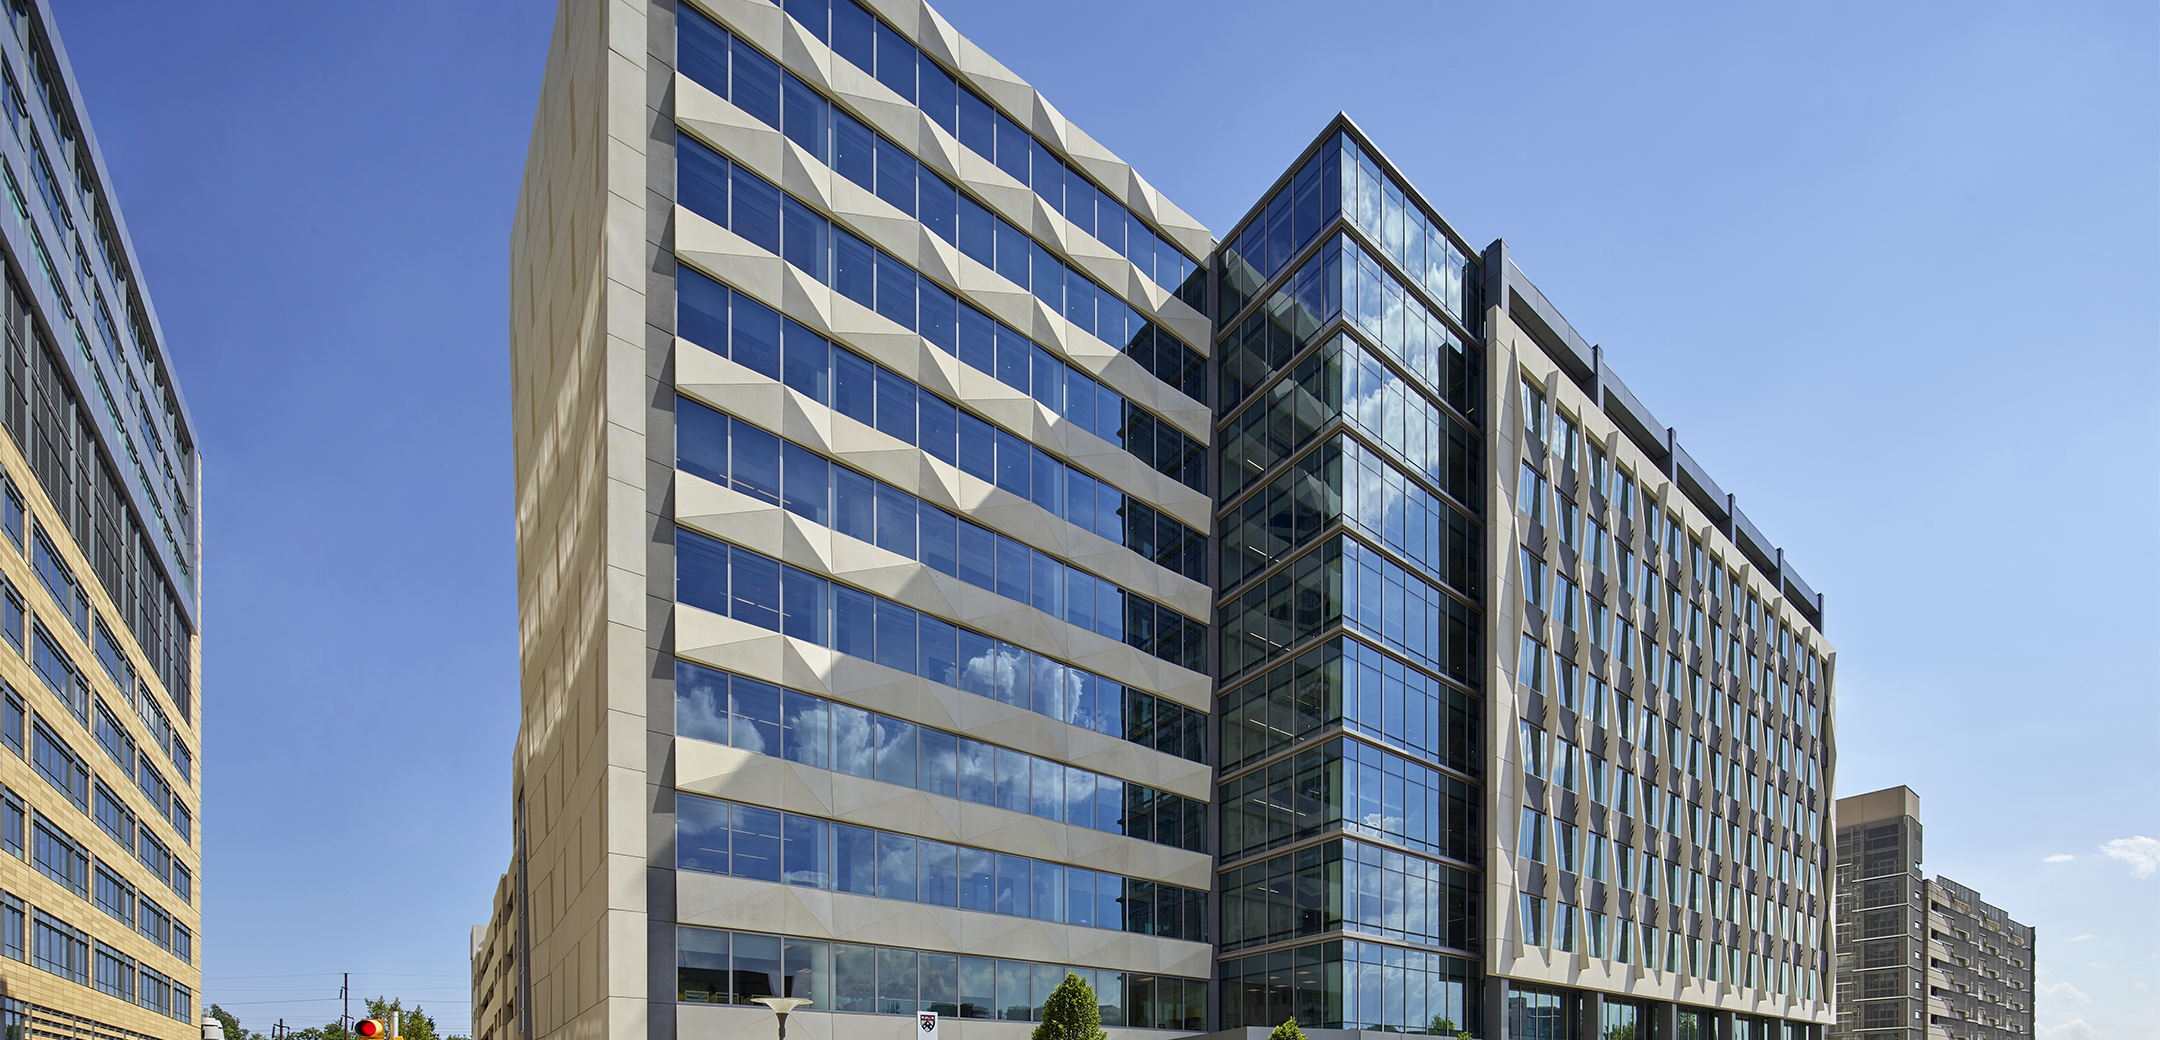 The exterior of a 10-story office tower for Penn Medicine featuring precast panels framing floor-to-ceiling glass on a street lined with trees in Philadelphia.